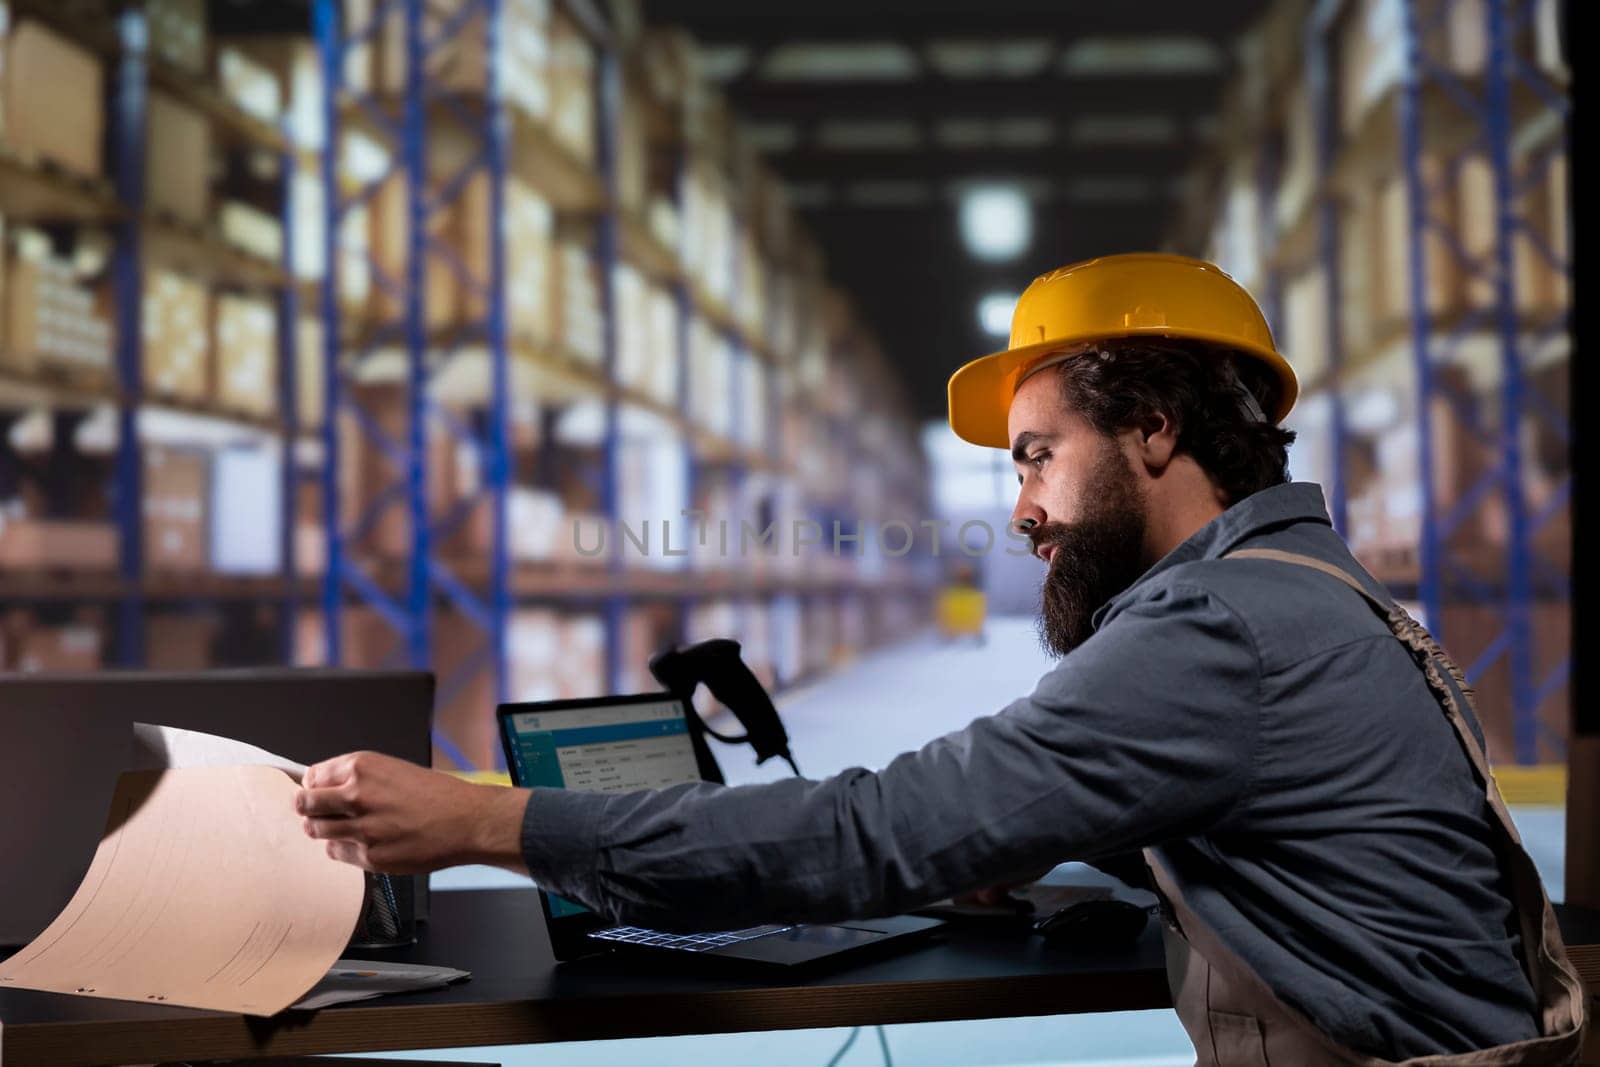 Inventory engineer uses barcode reader to verify products and orders, working on distribution and shipment. Customs compliance employee scanning merchandise tags and labels at warehouse.